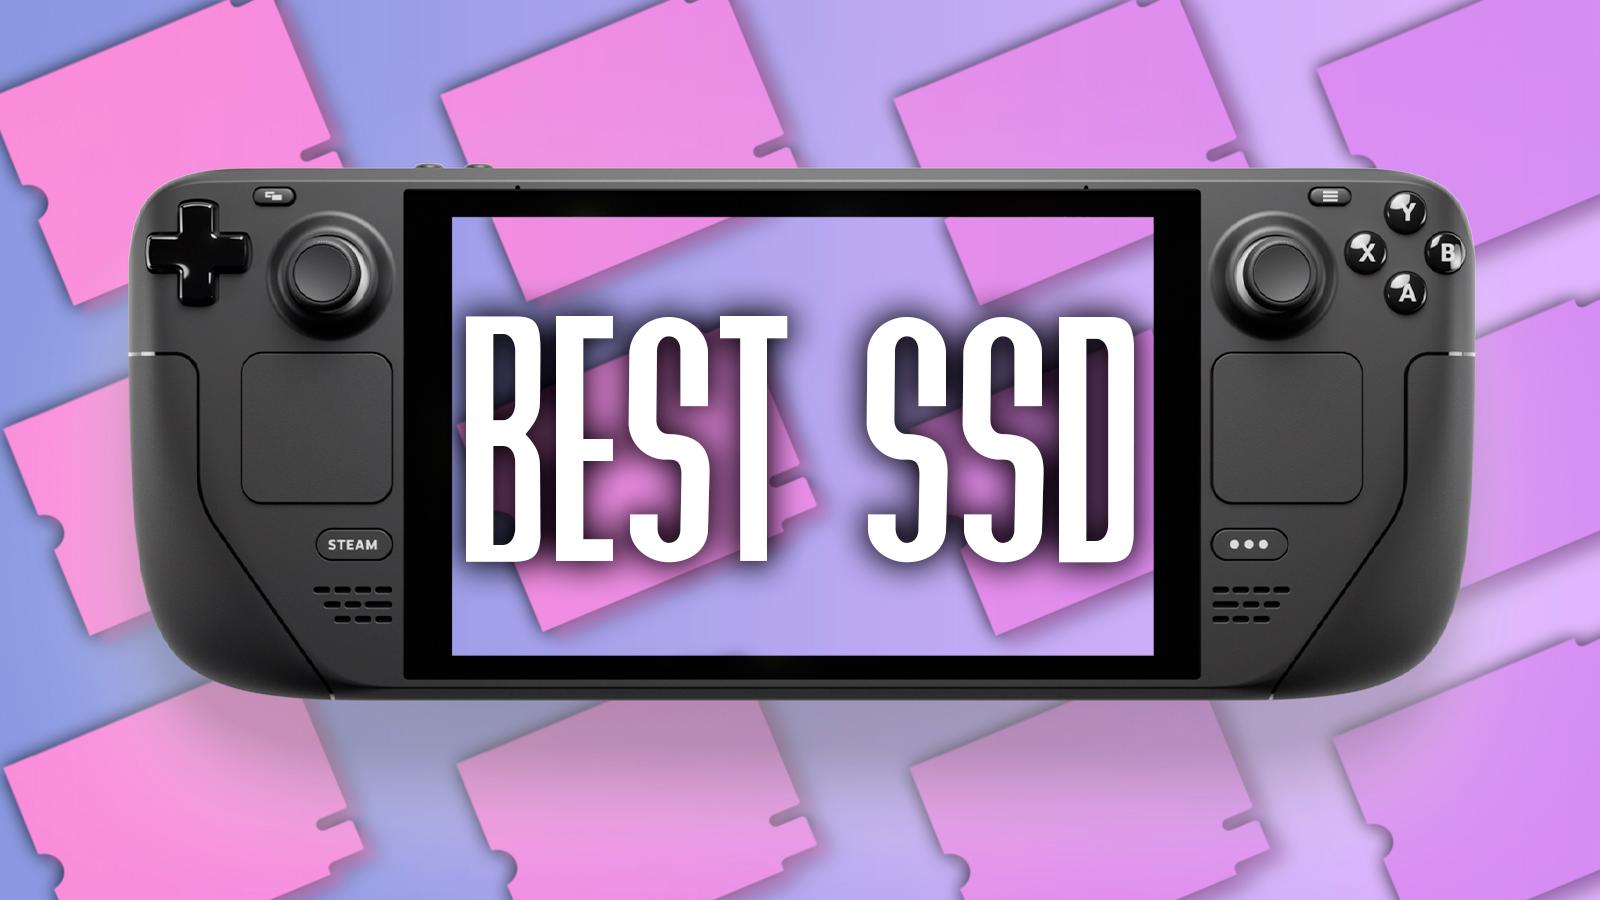 Best gaming SSDs for 2023